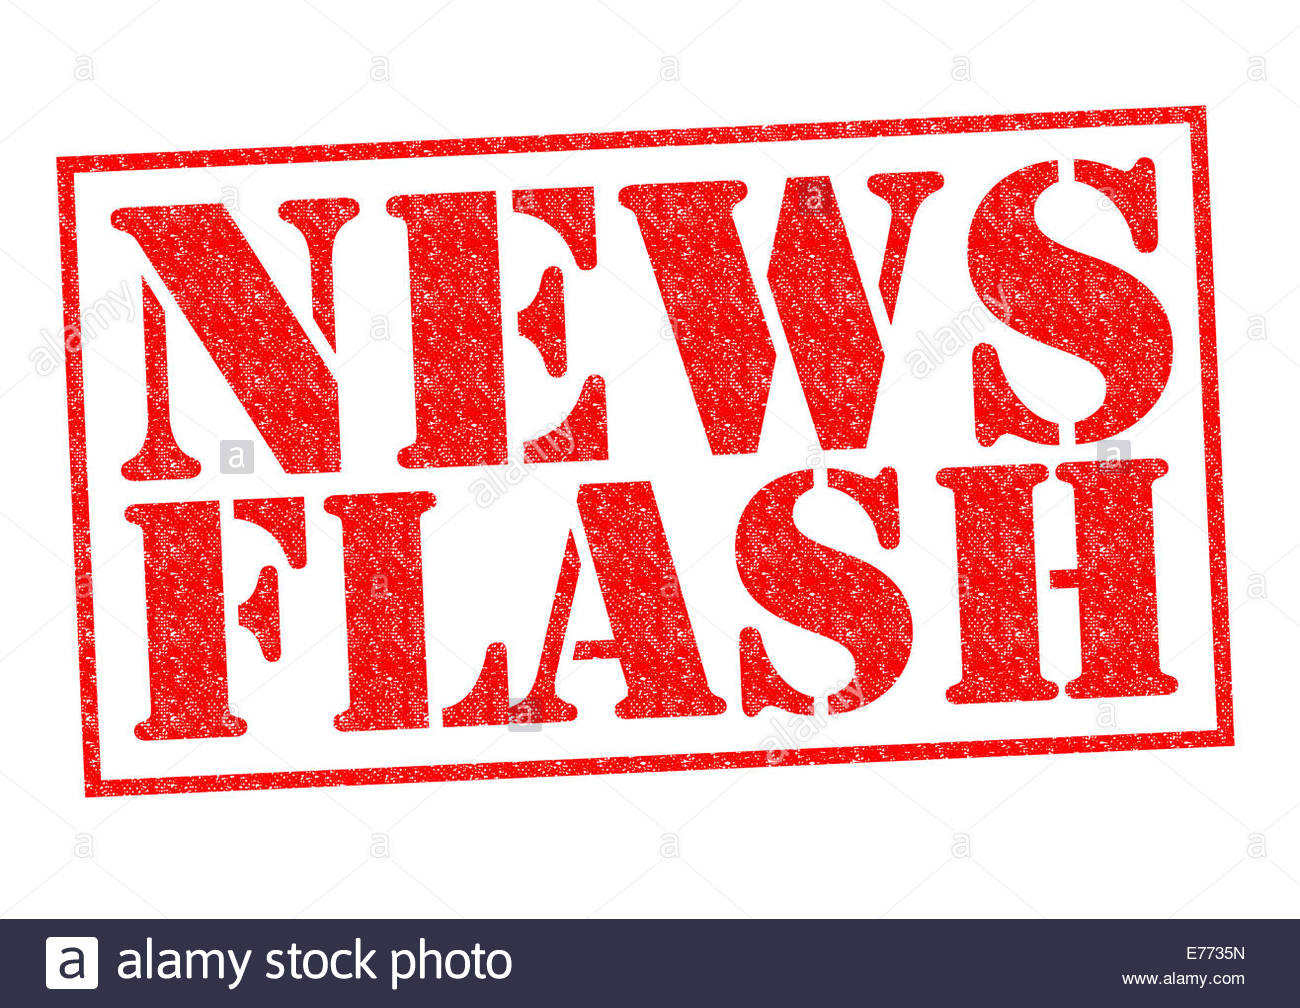 News Flash Red Rubber Stamp Over A White Background Stock Photo